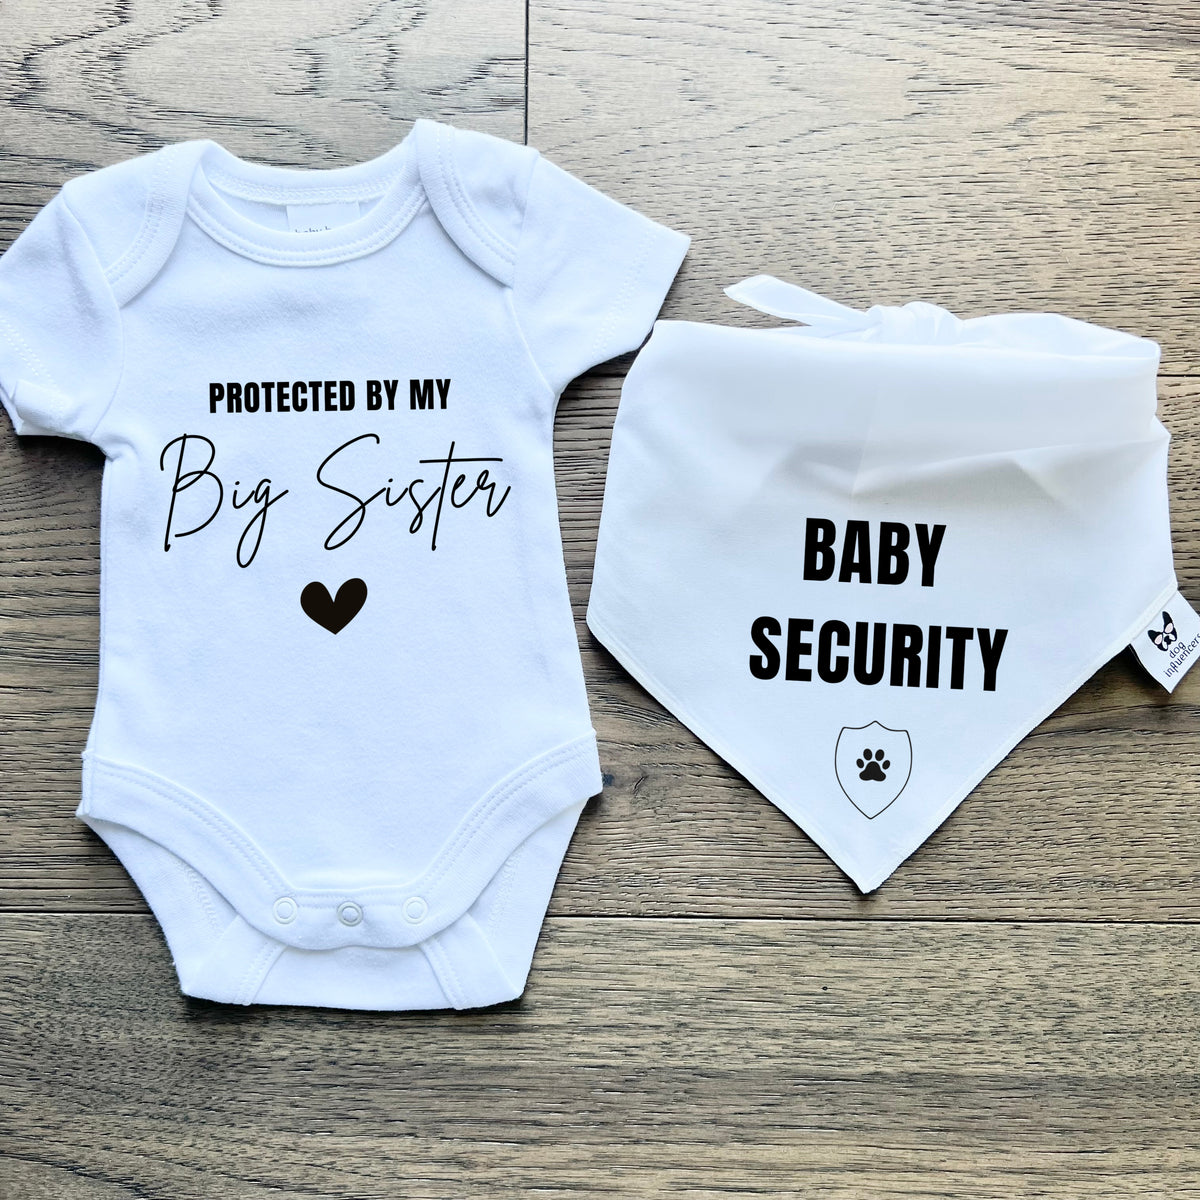 Matching Baby Onesie and Dog Bandana Pregnancy Announcement - Baby Security Big Sister